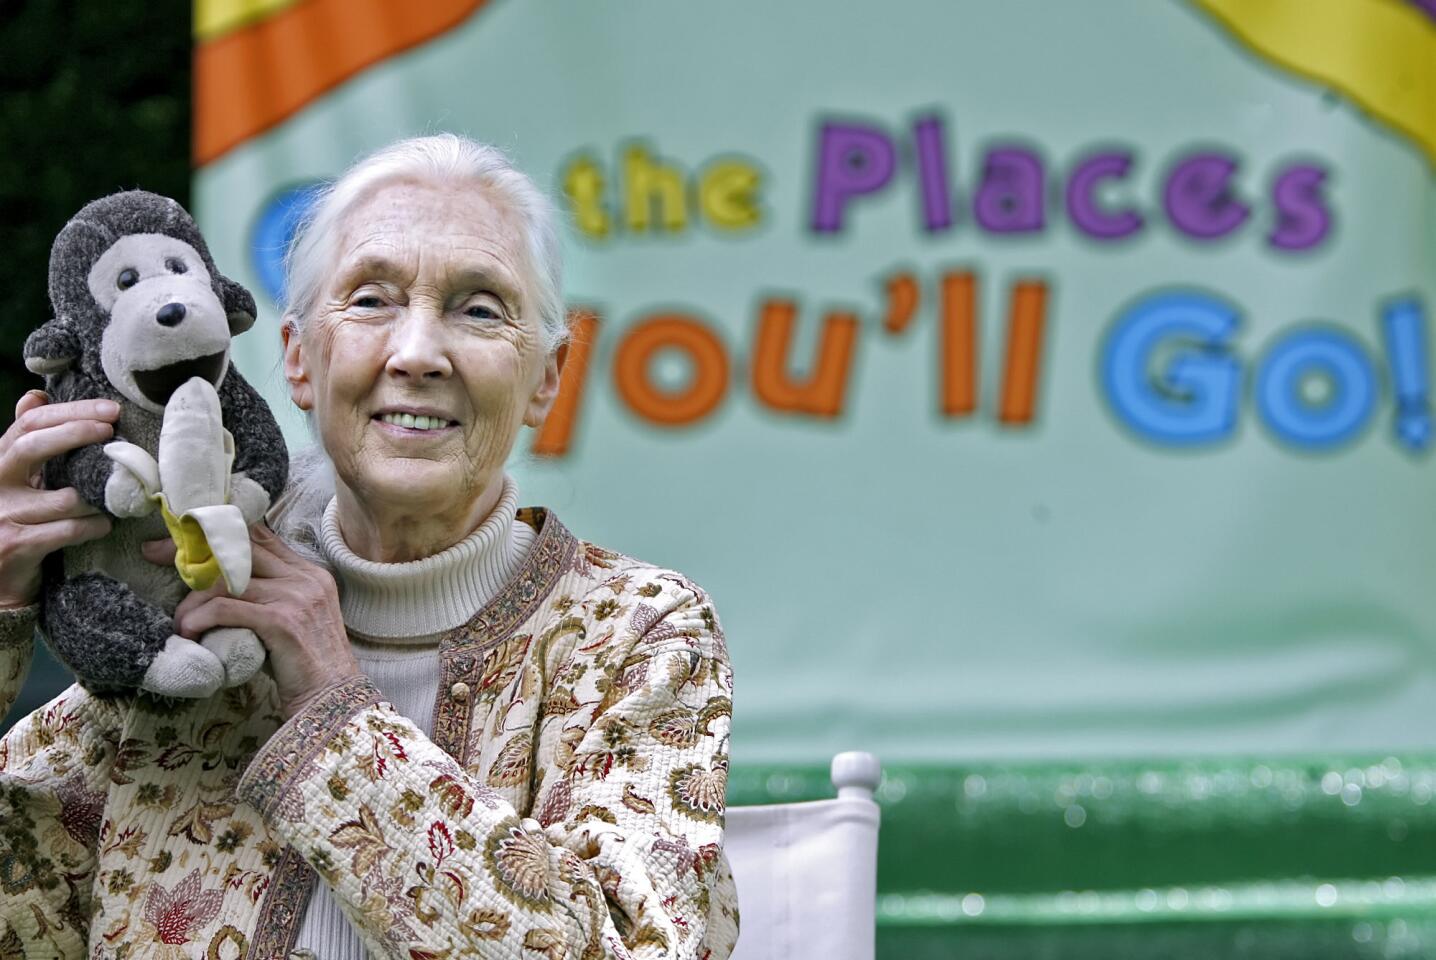 United Nations Messenger of Peace Dr. Jane Goodall will serve as the Grand Marshal of the 2013 Tournament of Roses festivities, announced at the Tournament House in Pasadena on Wednesday, April 25, 2012.